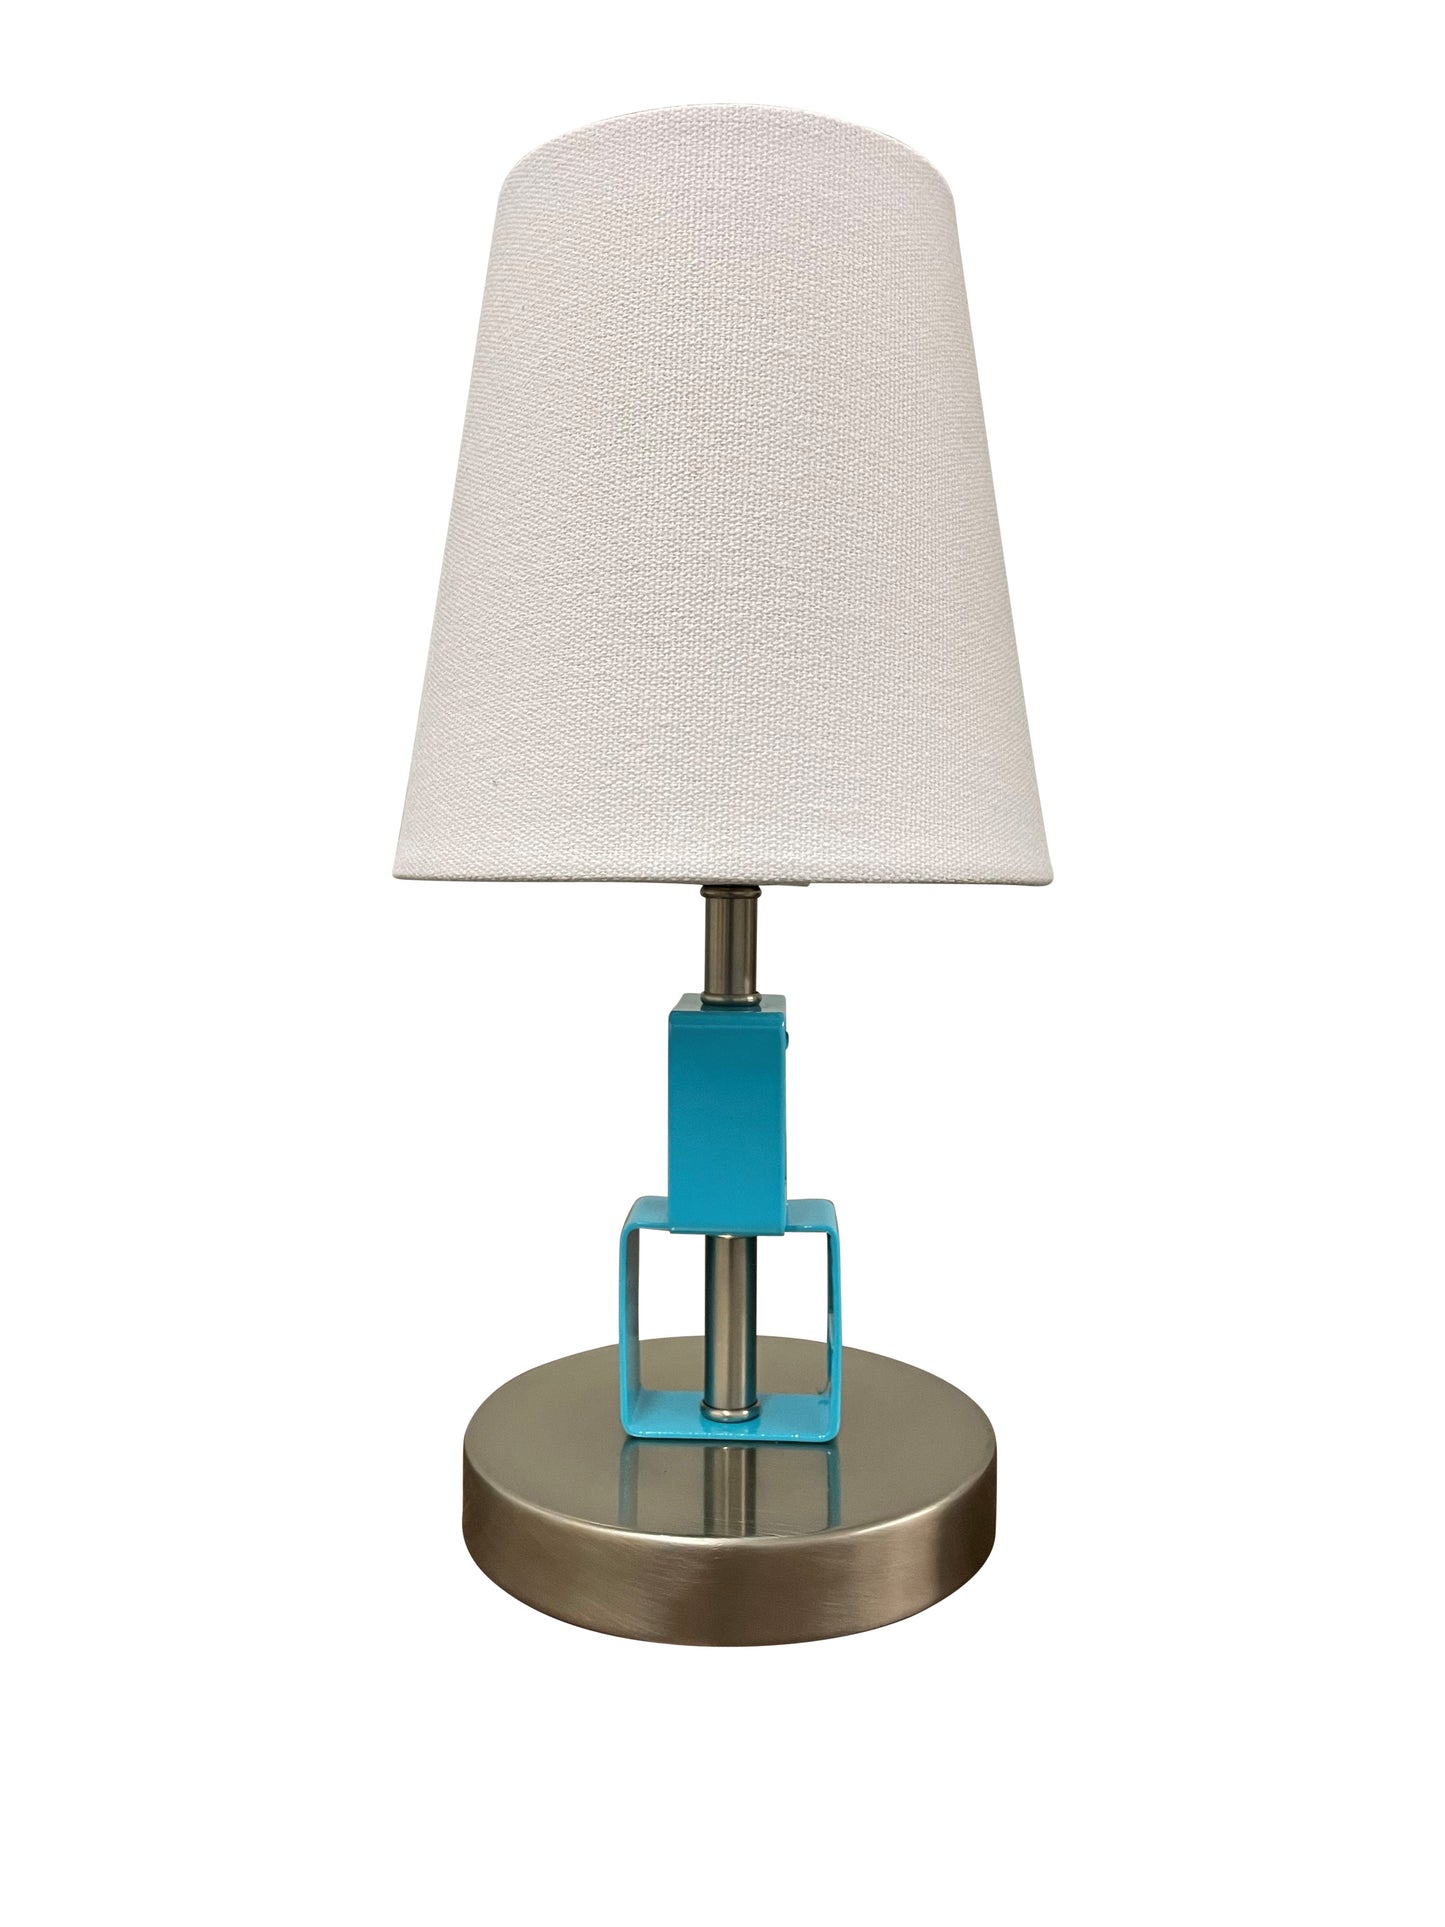 Bryson Mini Satin Nickel Azure Accent Lamp by House of Troy